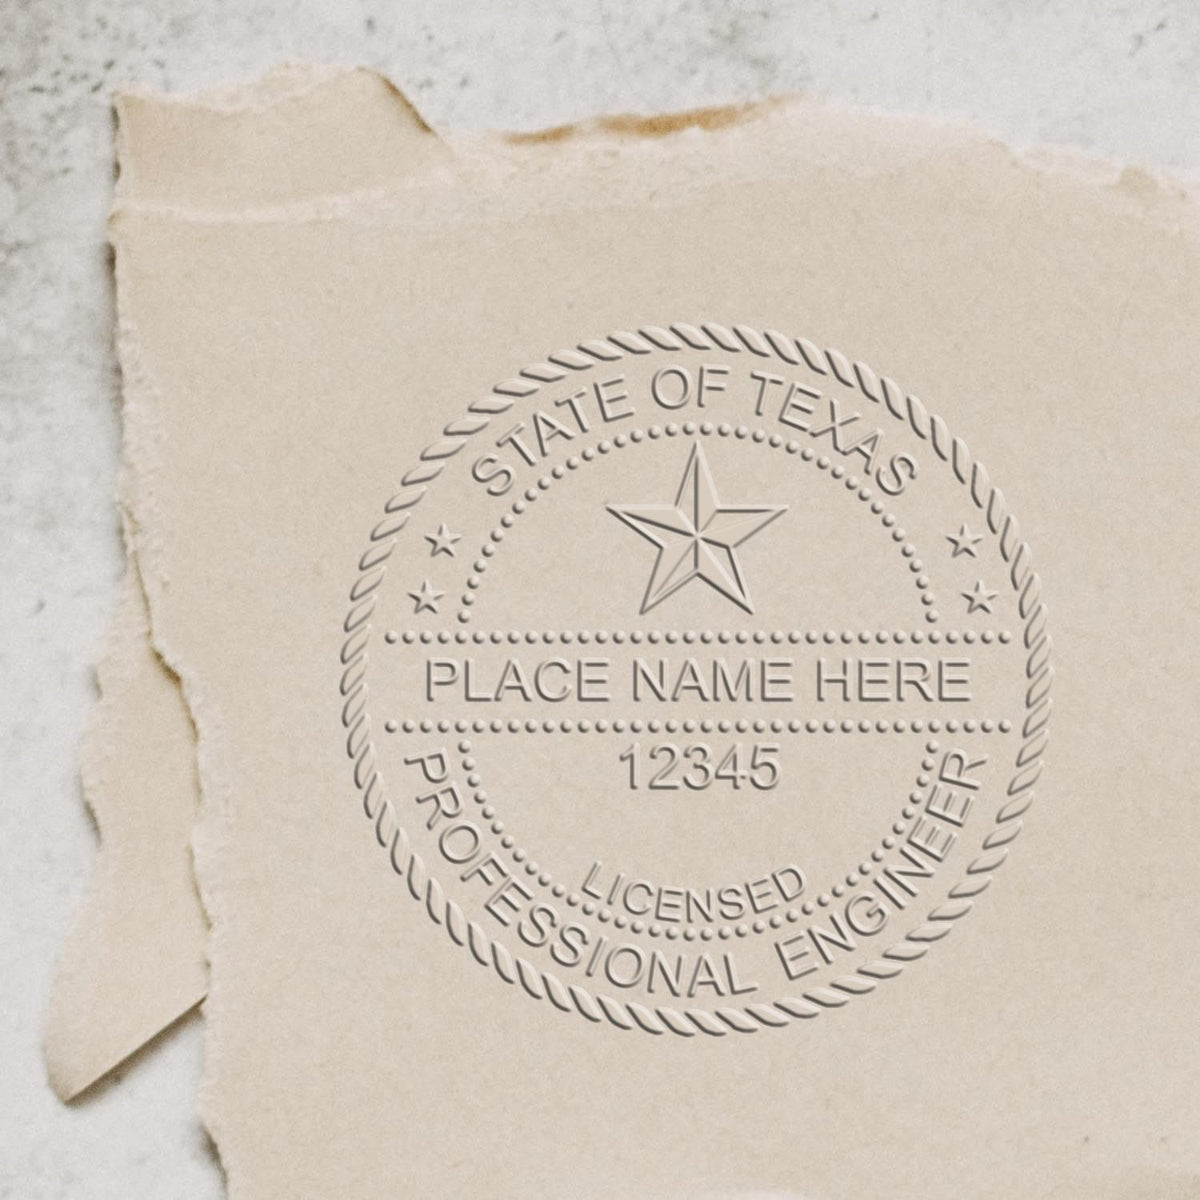 The Heavy Duty Cast Iron Texas Engineer Seal Embosser stamp impression comes to life with a crisp, detailed photo on paper - showcasing true professional quality.